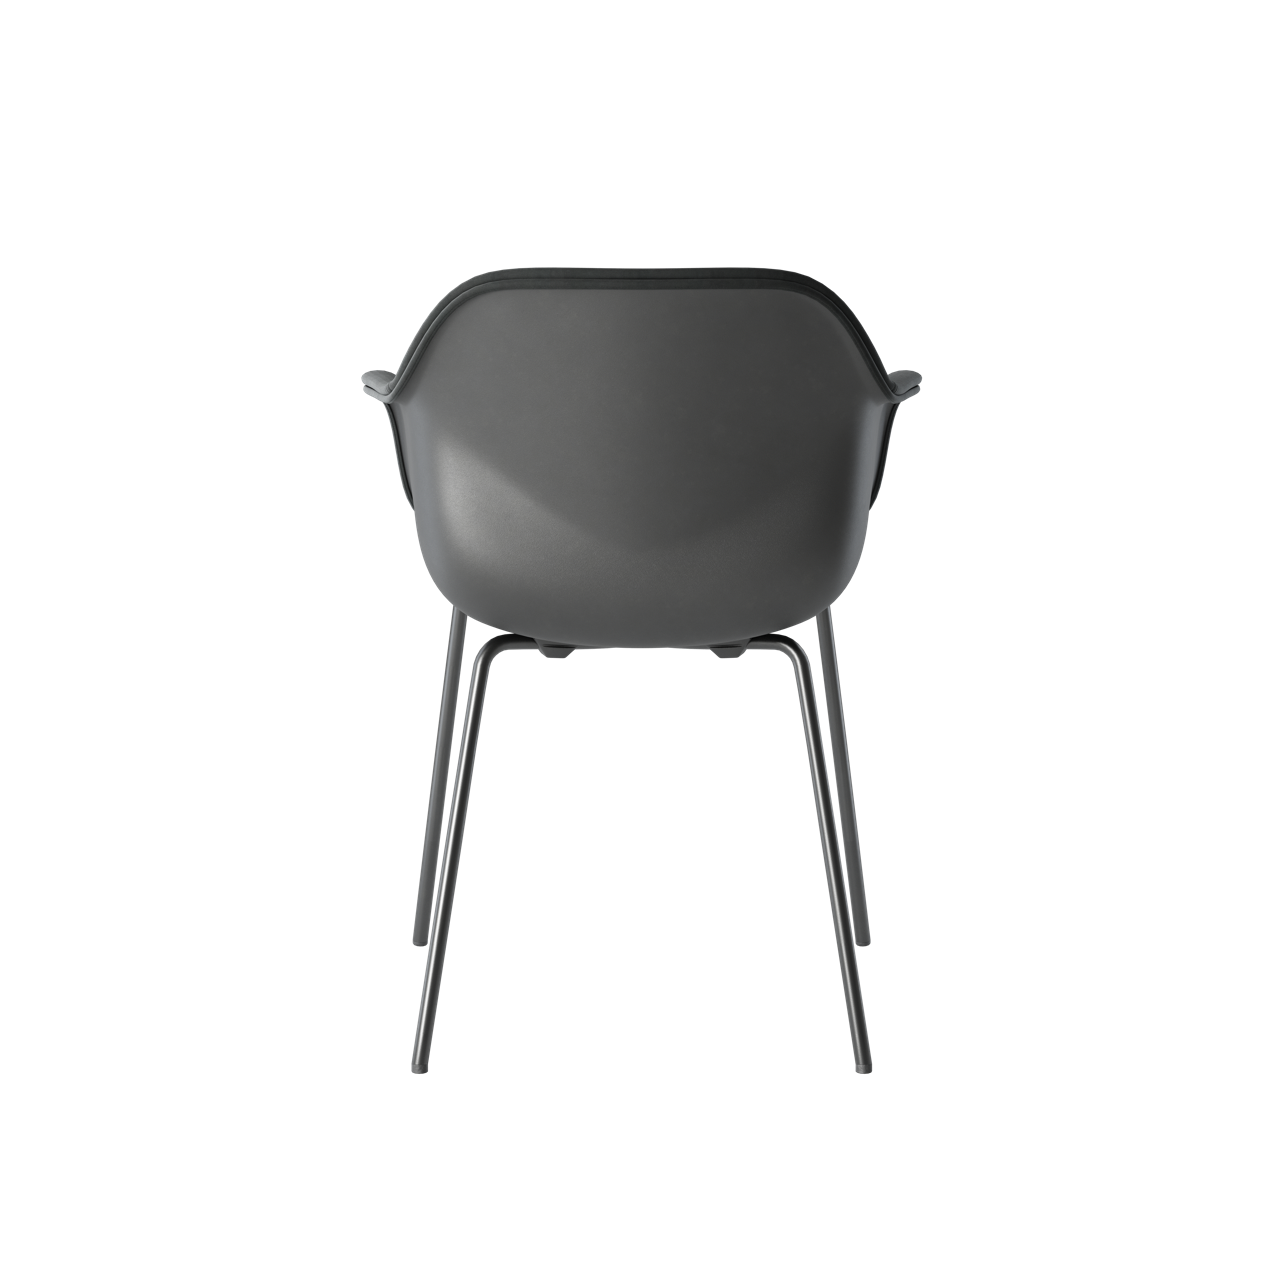 OCEE&FOUR – Chairs – FourMe 44 – Plastic Shell - Inner Upholstery - Packshot Image 1 Large